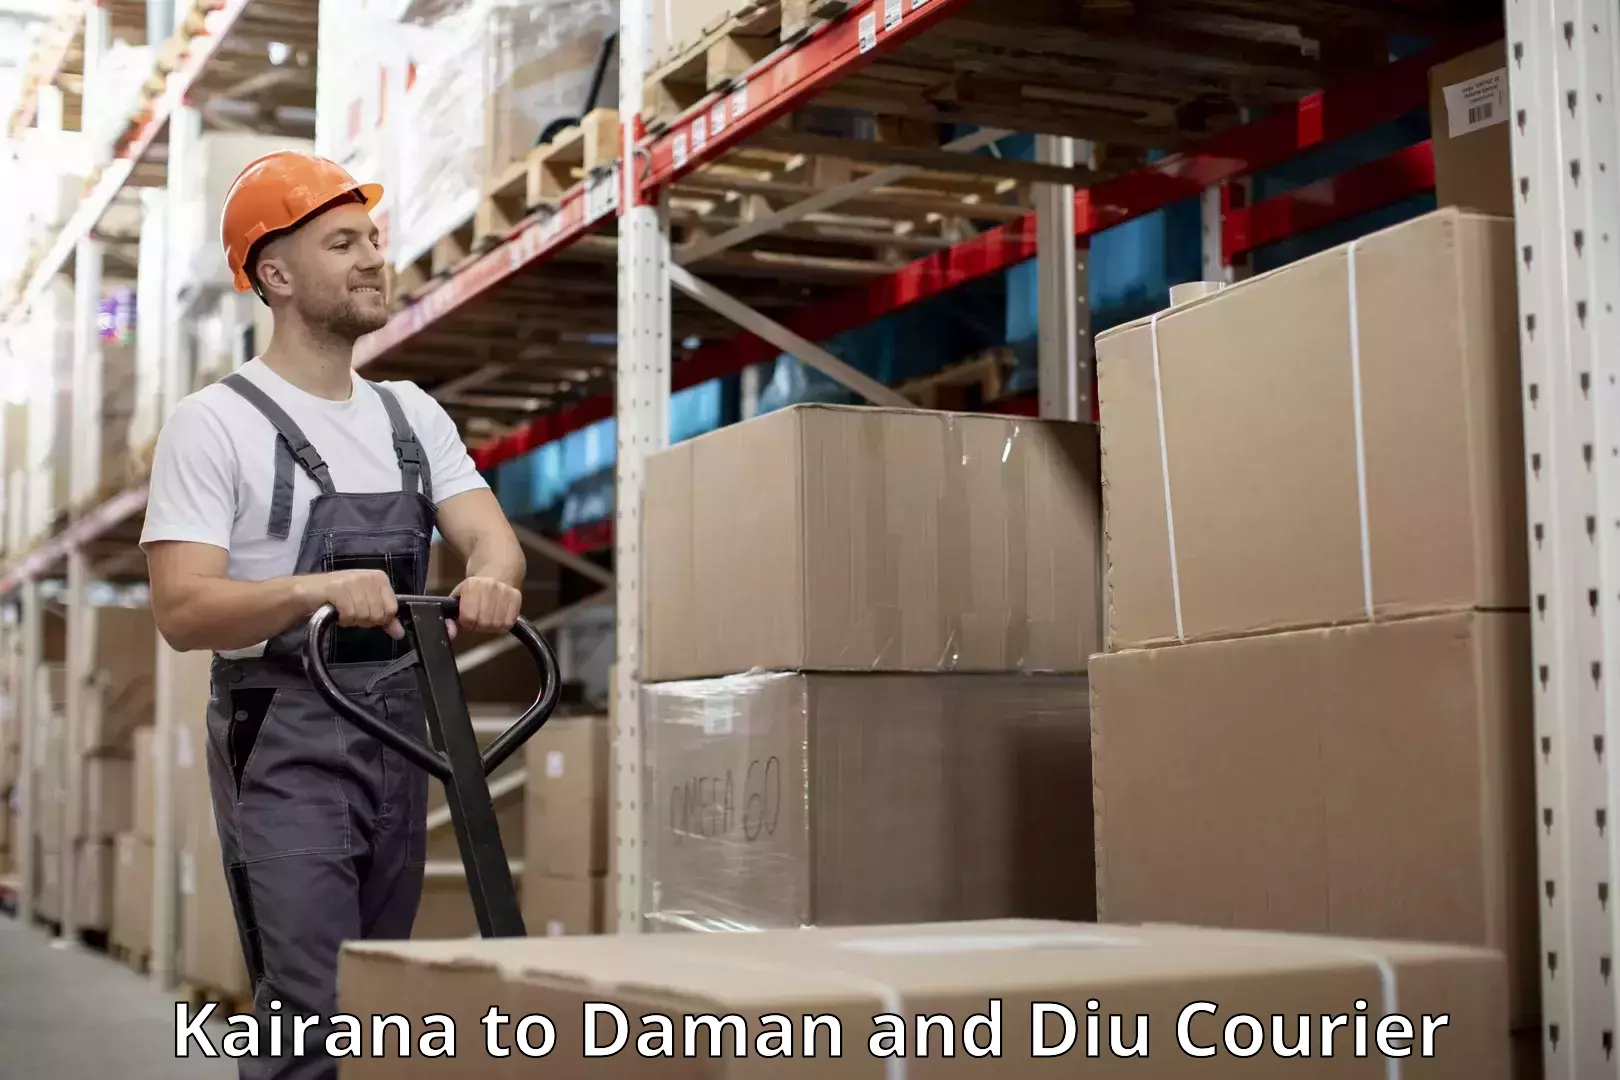 Luggage transport consultancy Kairana to Daman and Diu